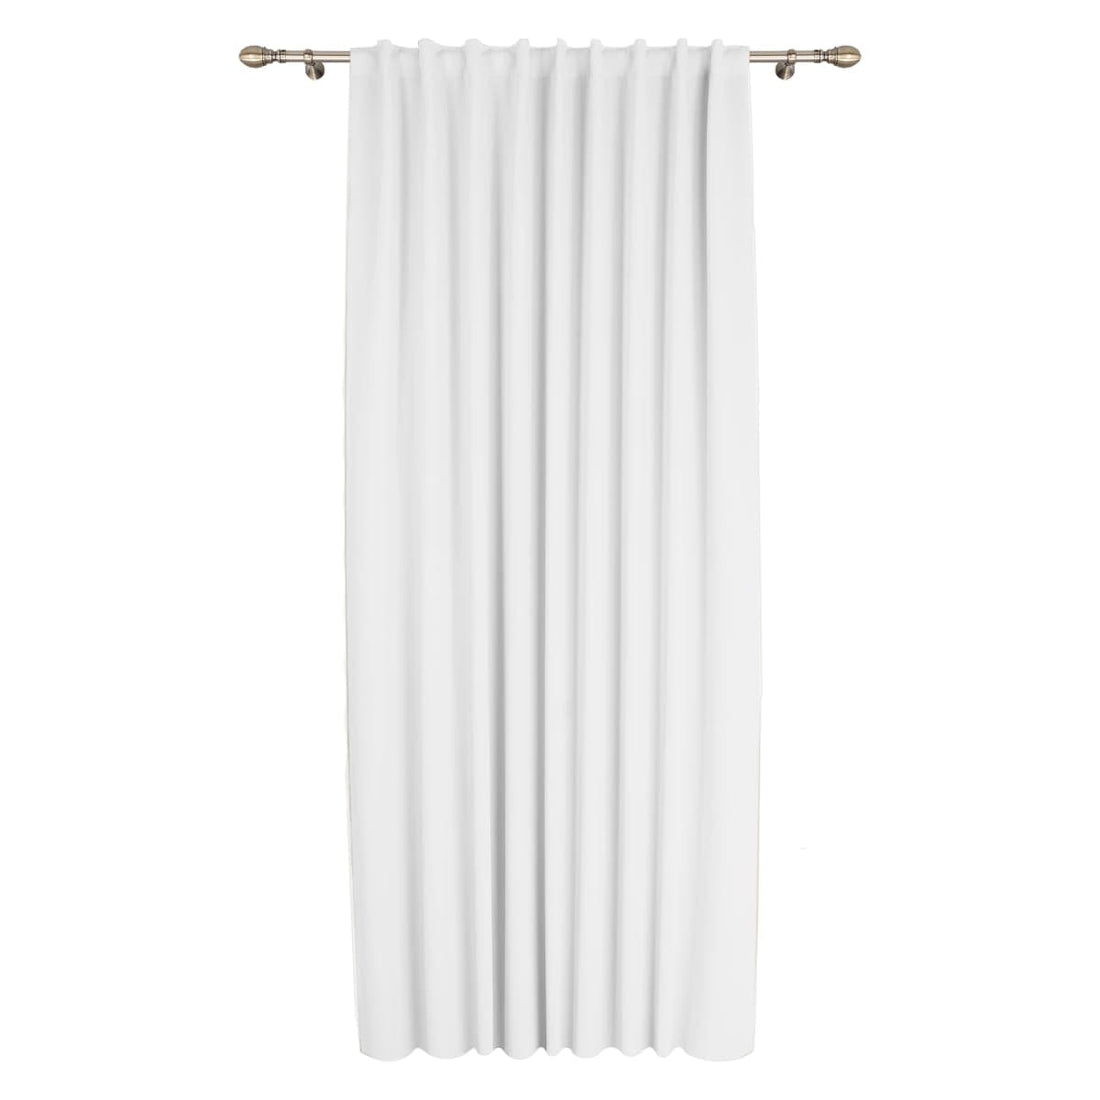 CAROL WHITE OPAQUE CURTAIN 200X280 CM WEBBING AND CONCEALED HANGING LOOP - best price from Maltashopper.com BR480009483